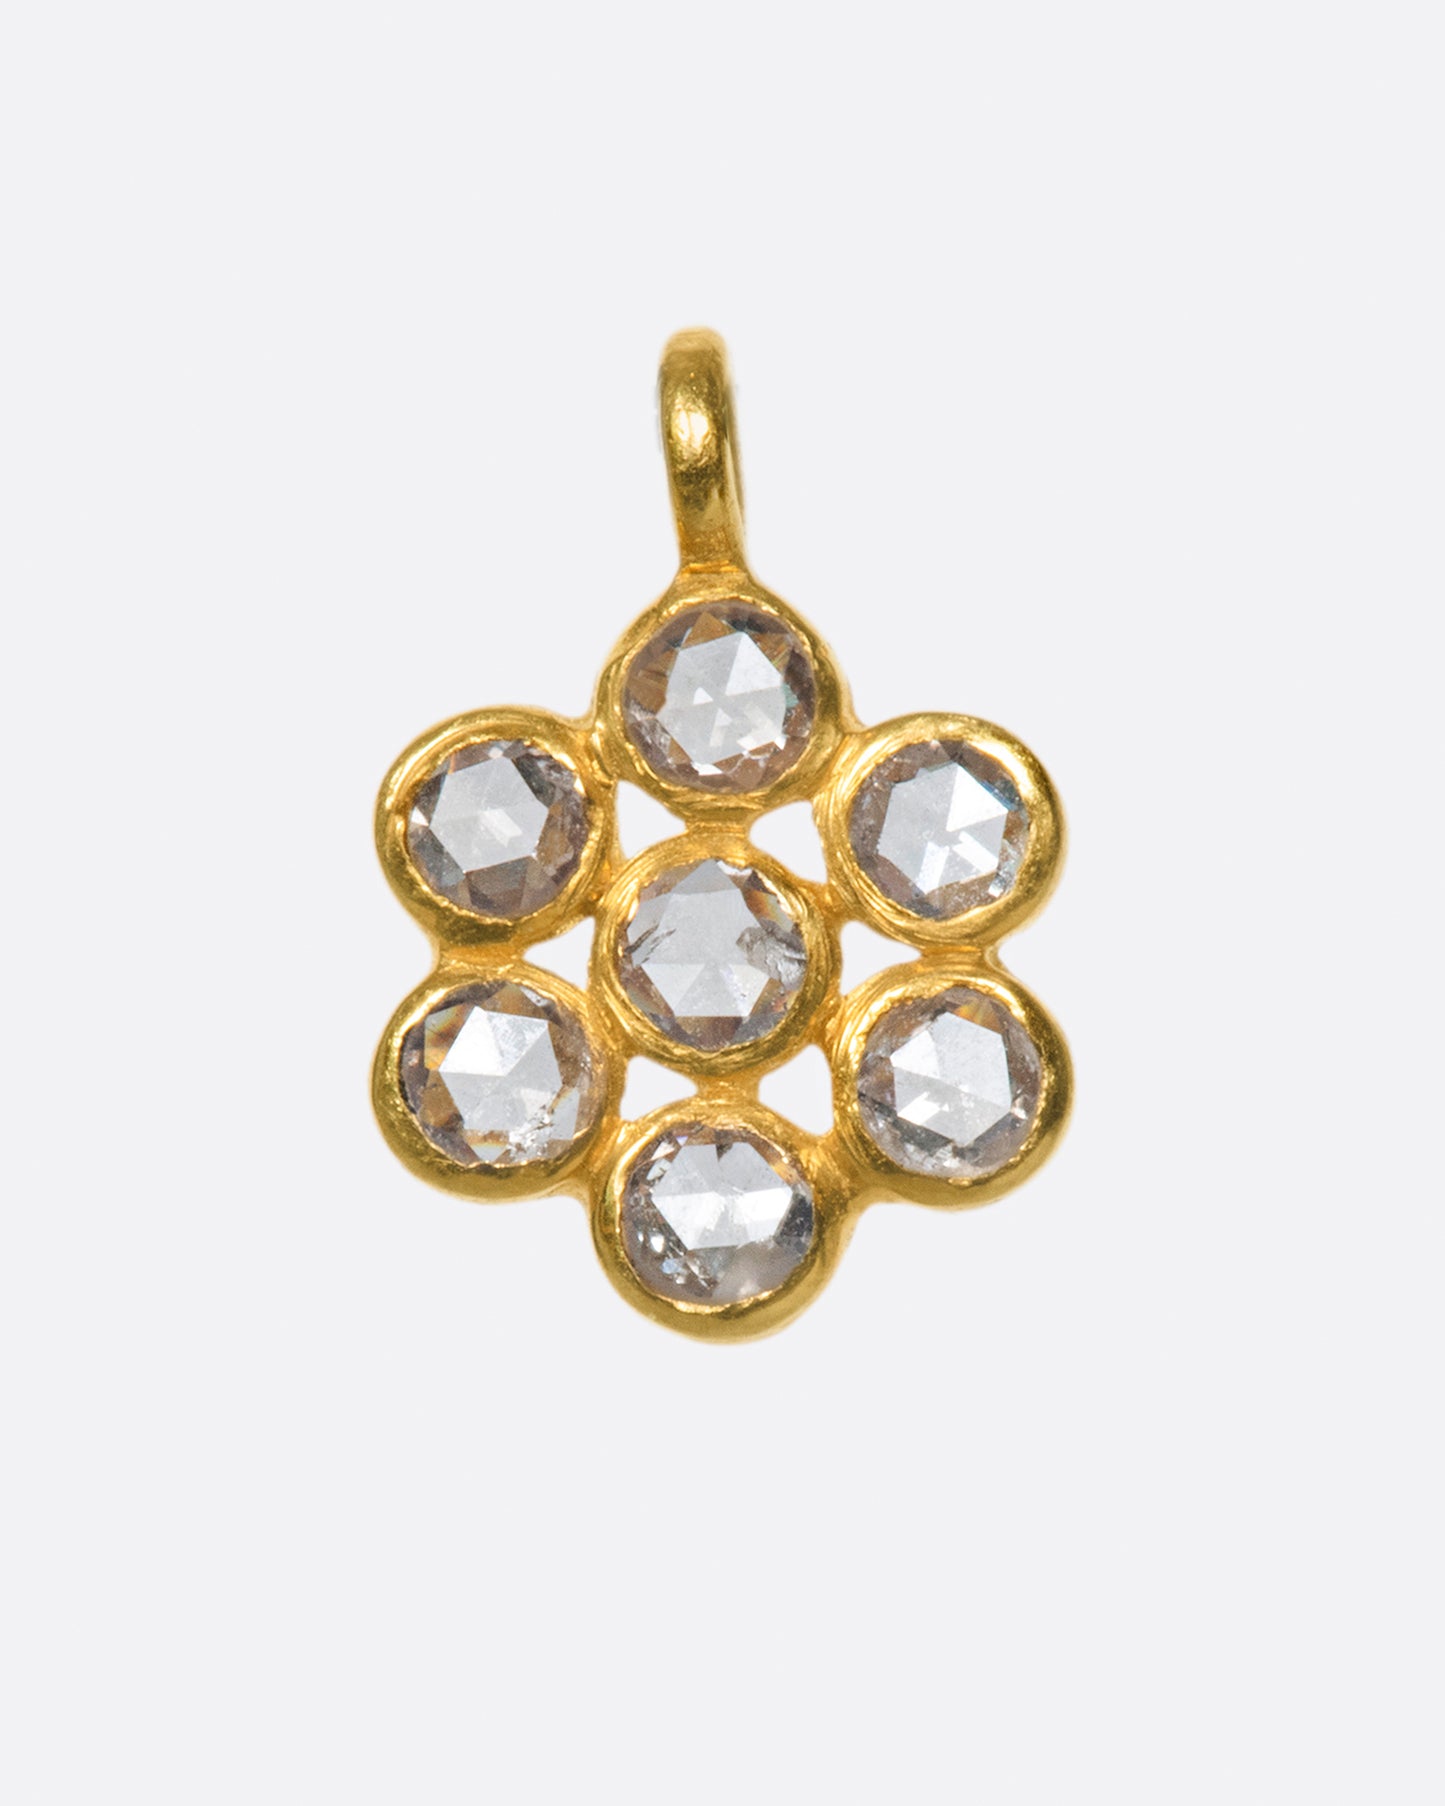 A cluster of round rose cut diamonds set in one of the simplest floral design.